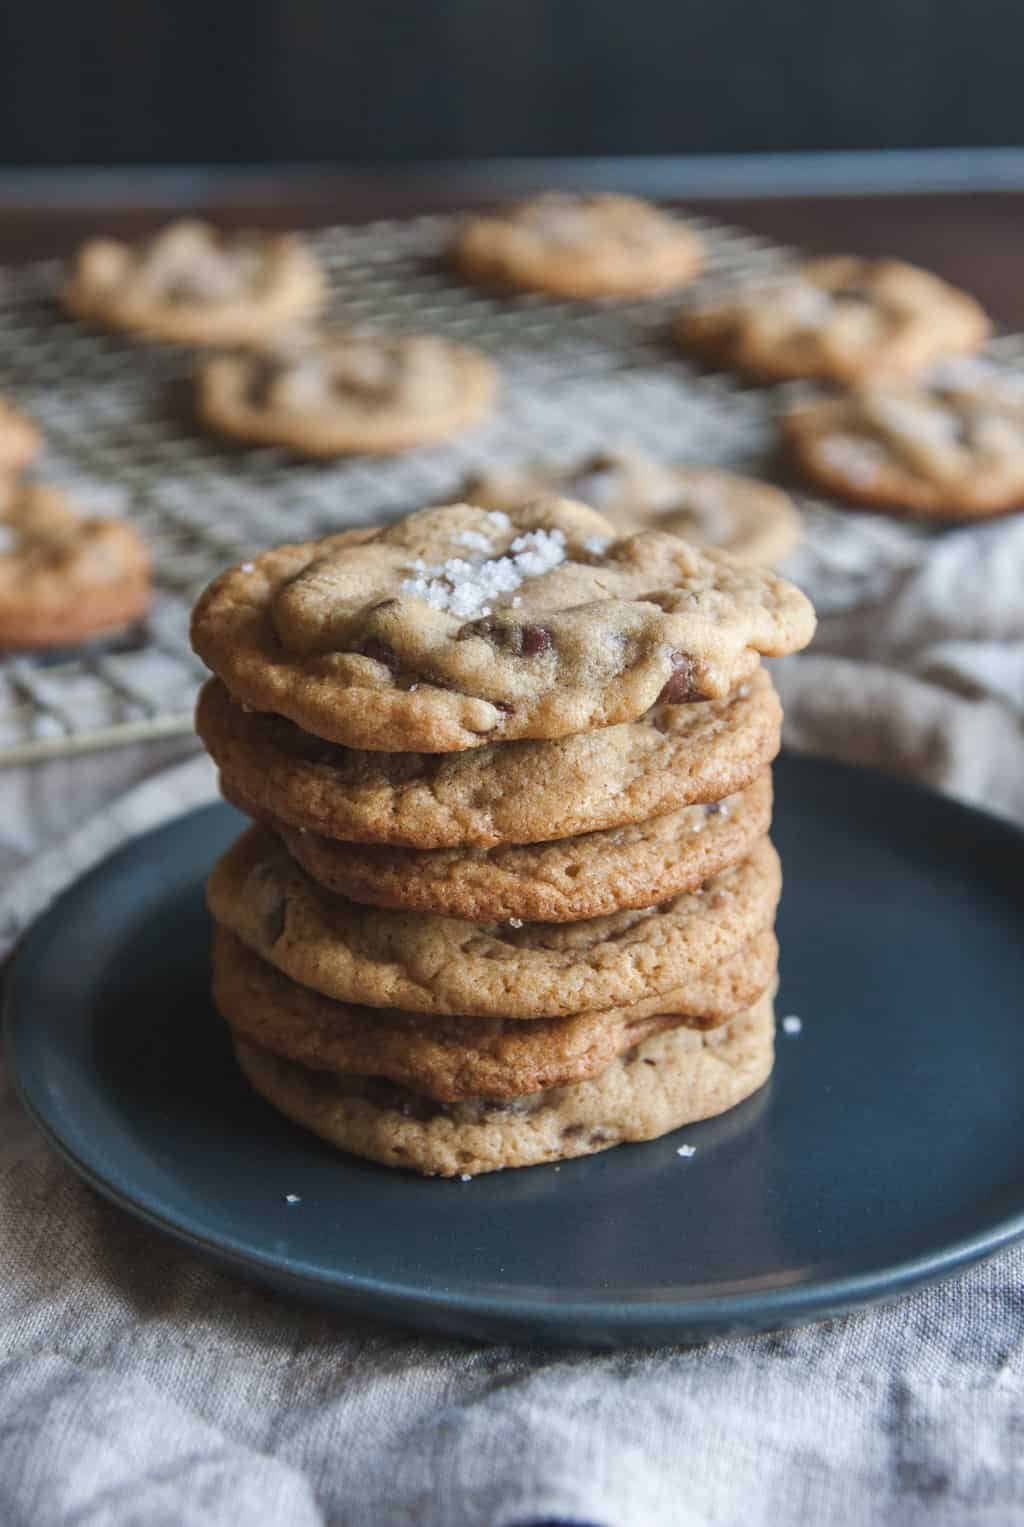 The Best Salted Caramel Chocolate Chip Cookies